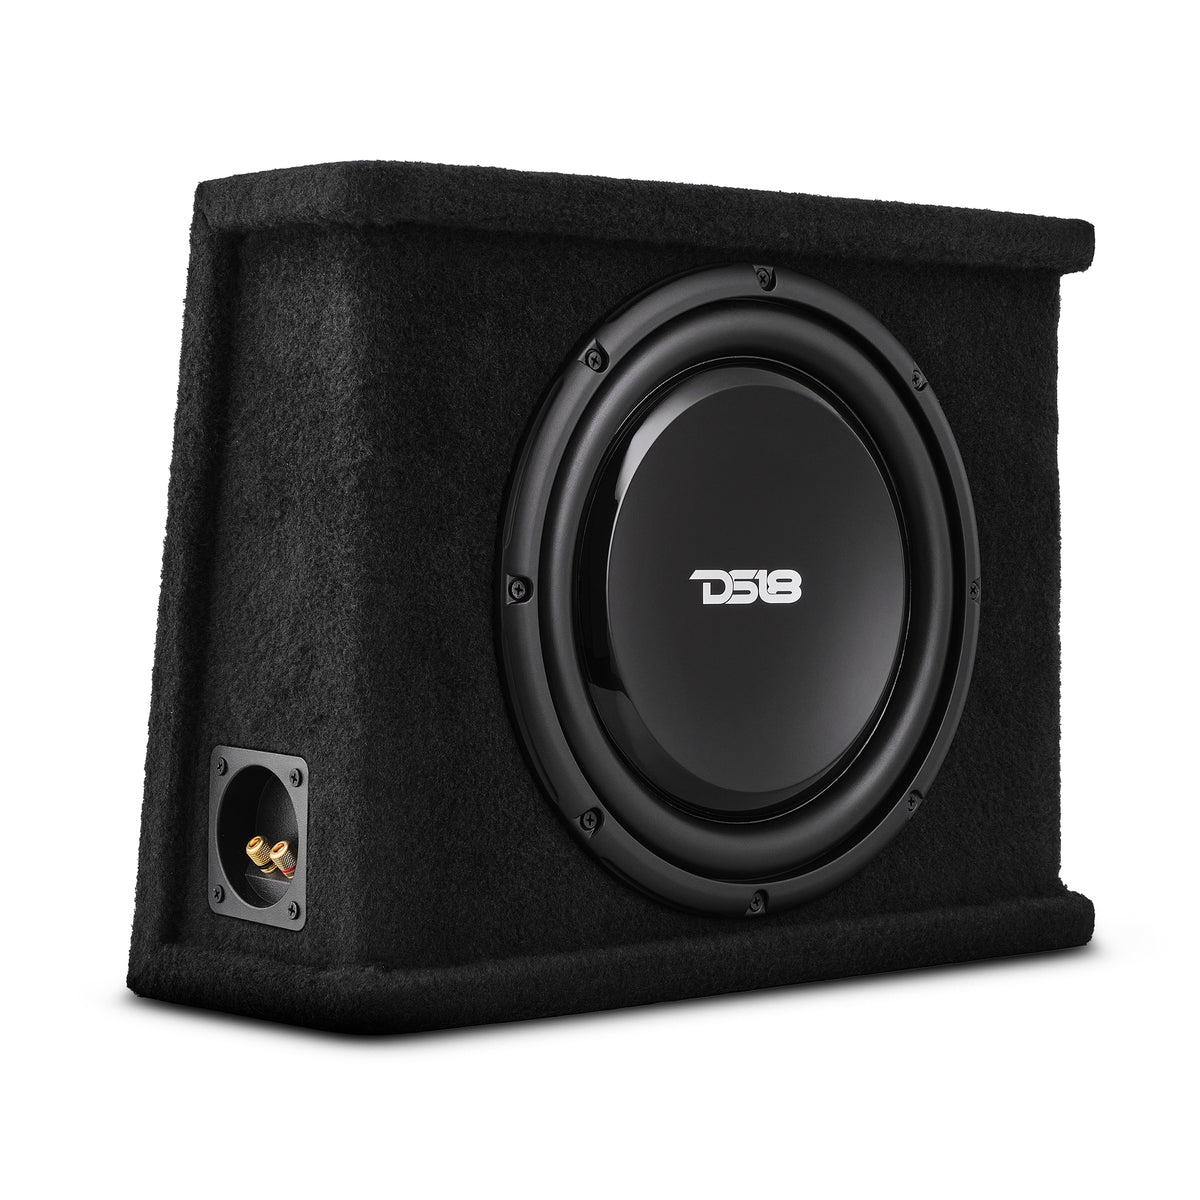 12" Loaded Shallow Subwoofer Enclosure 350 Watts Rms @ 2 ohm